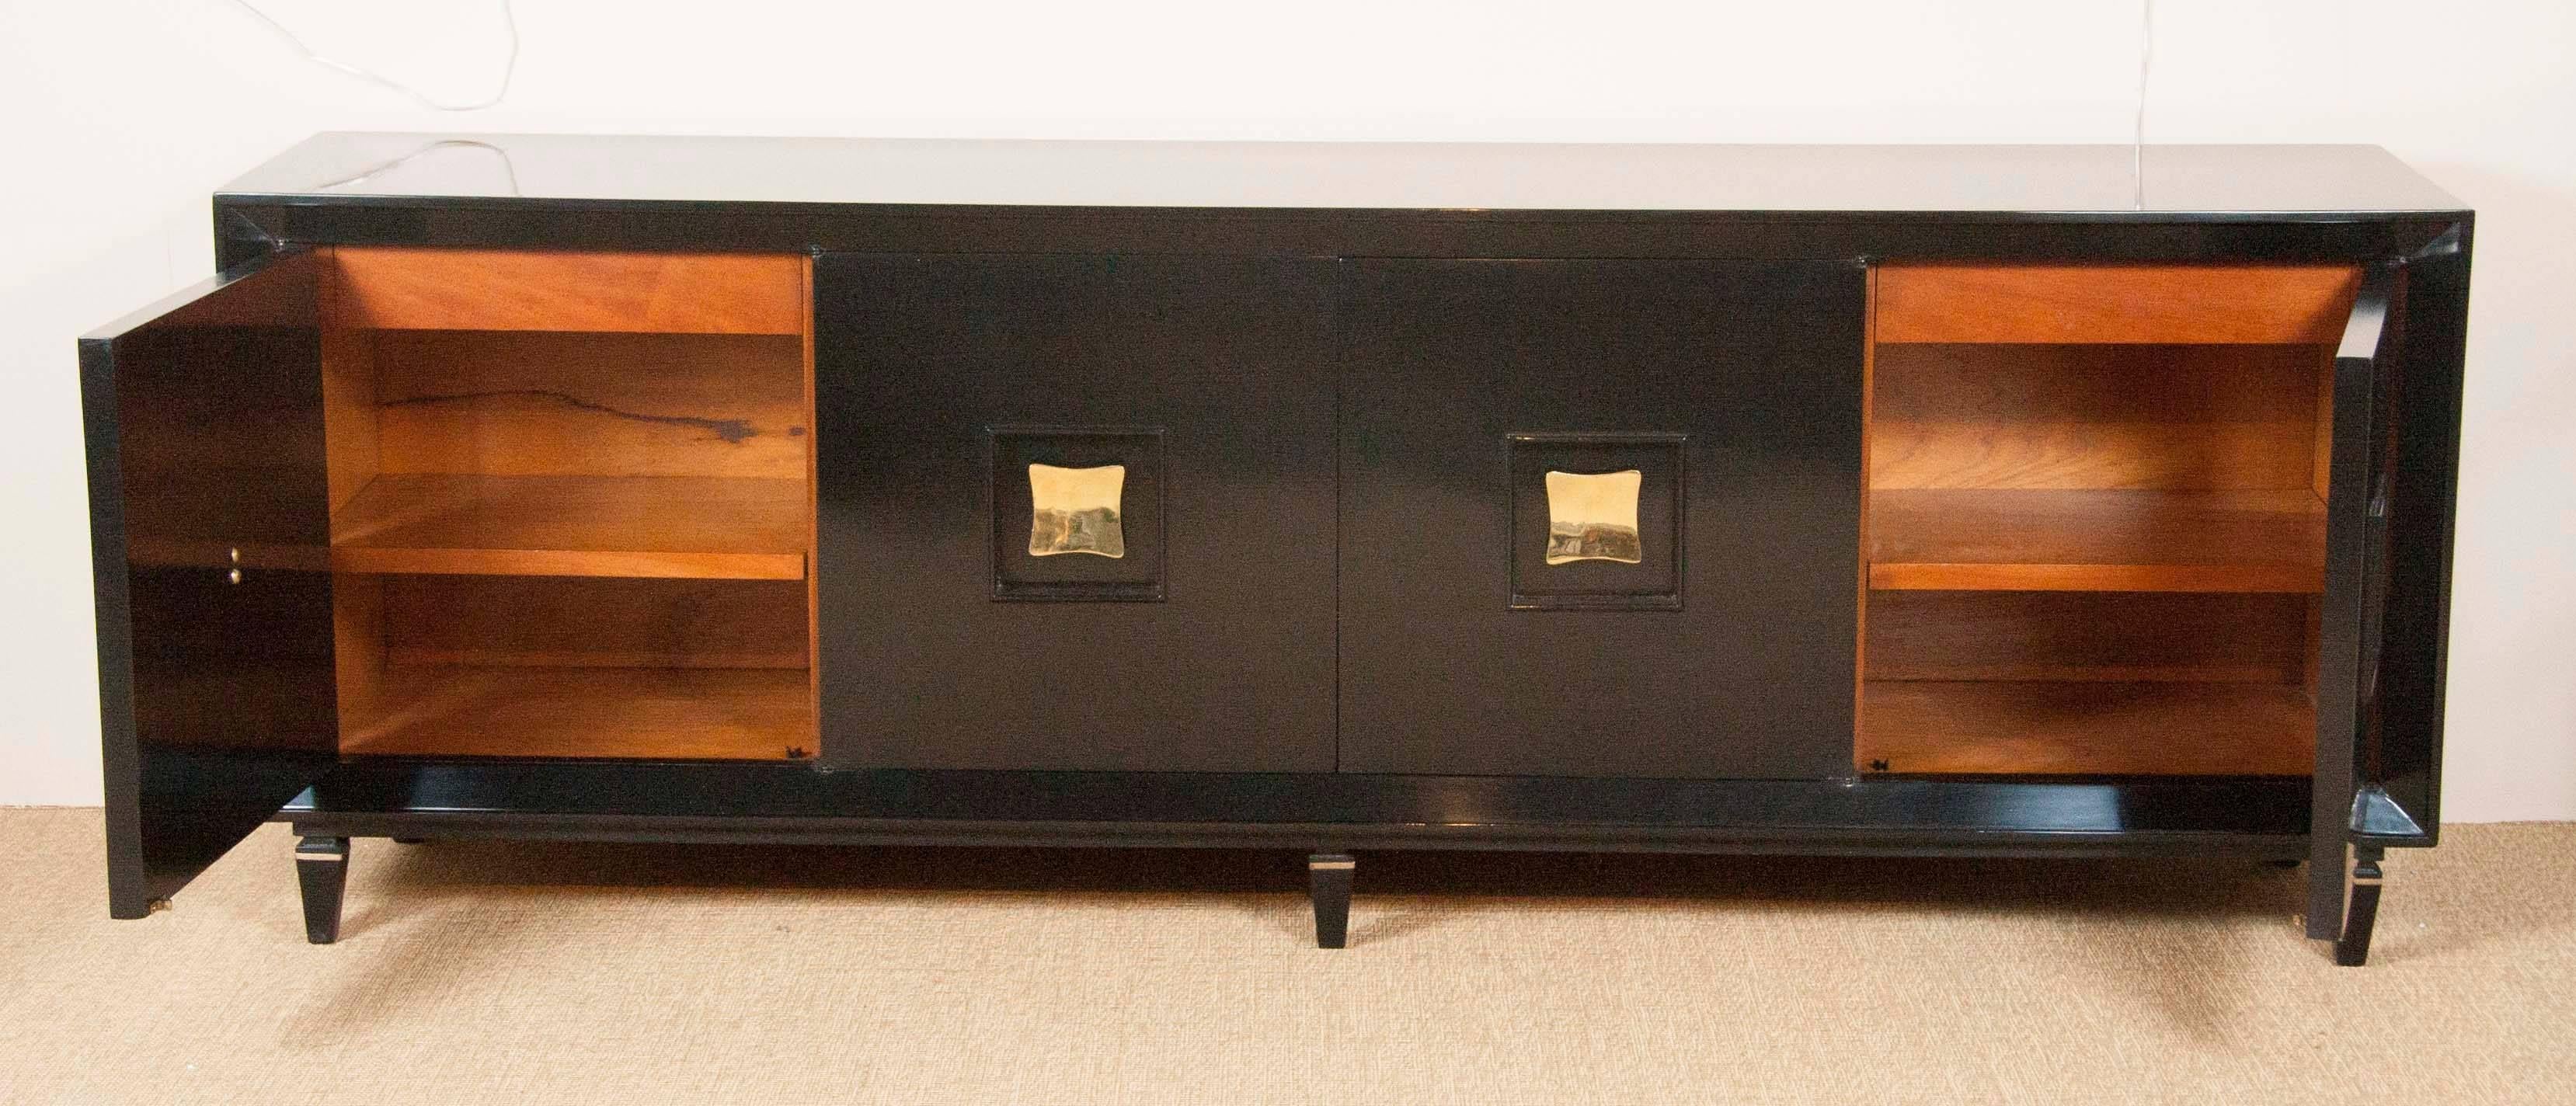 French Art Deco Black Lacquer Credenzas with Biomorphic Brass Pulls 1